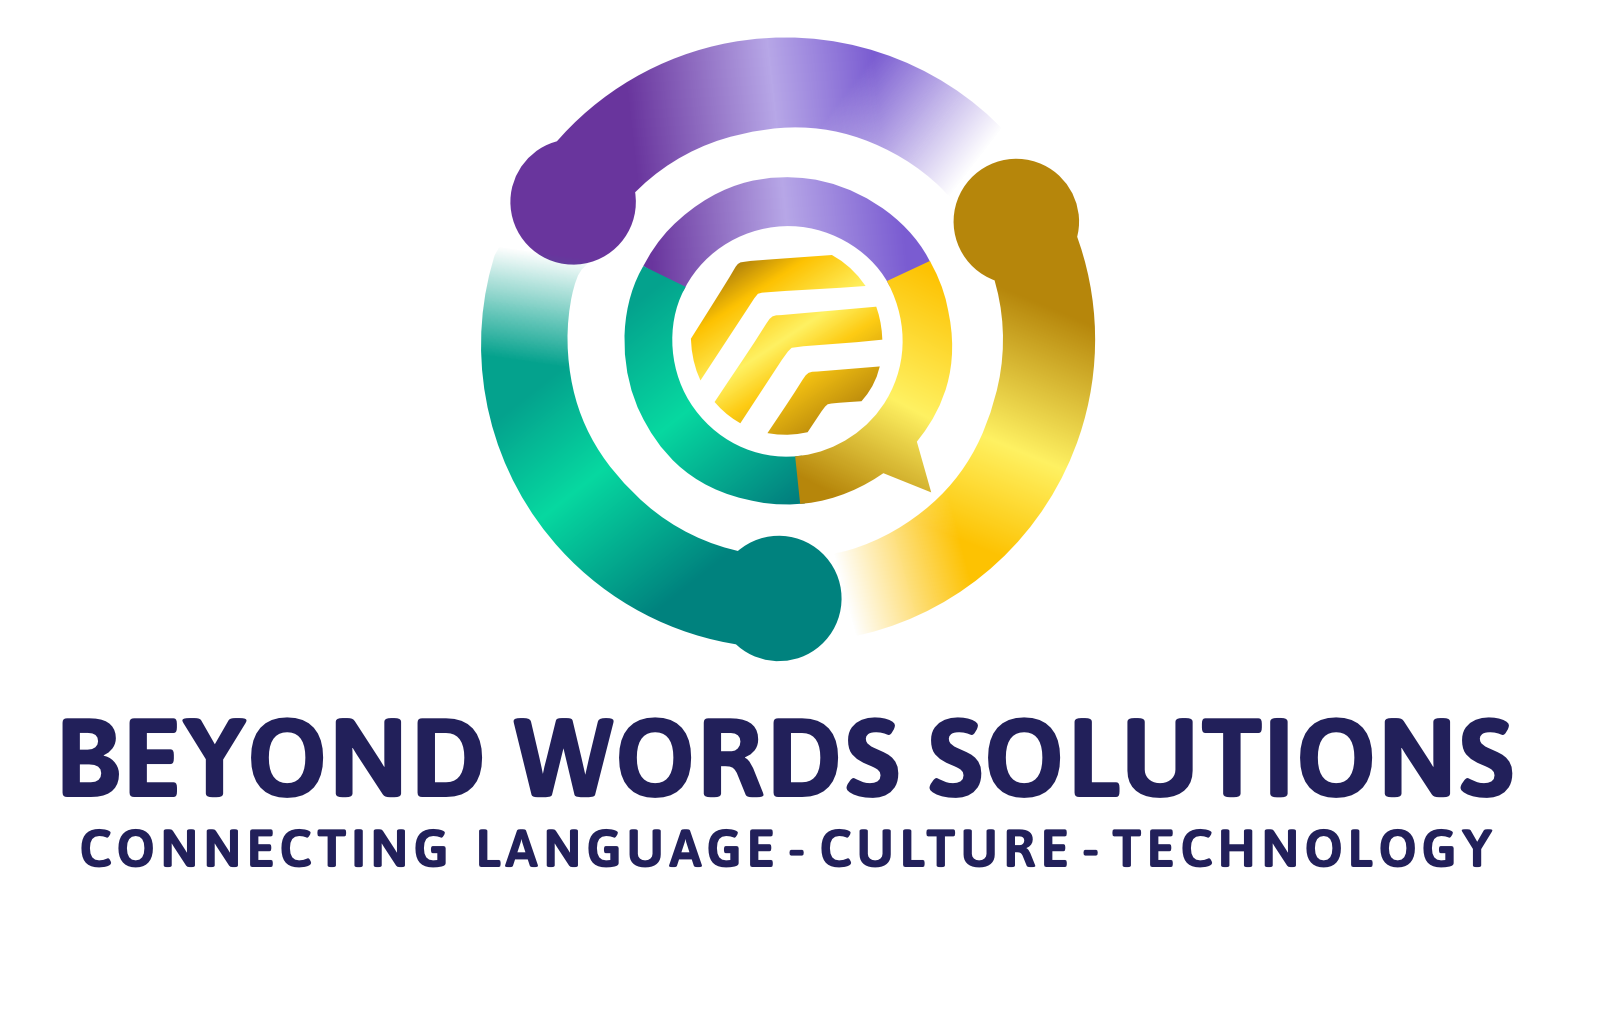 Beyond Words Solutions|French and English Translation Services|Ohio, USA